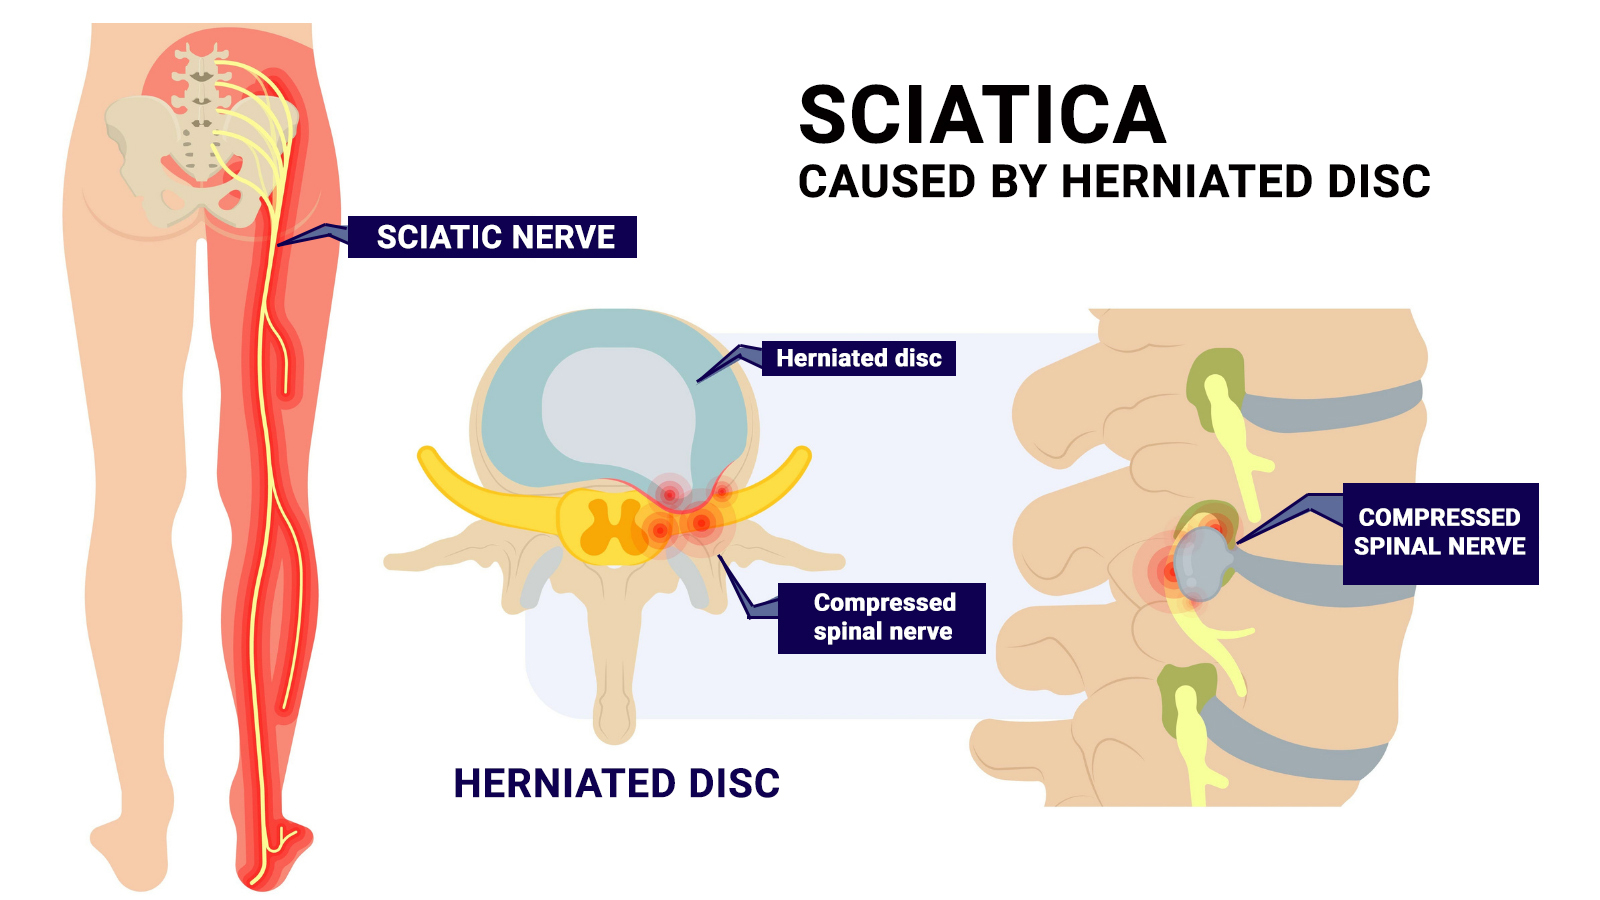 Therapia - Physiotherapy for Sciatica